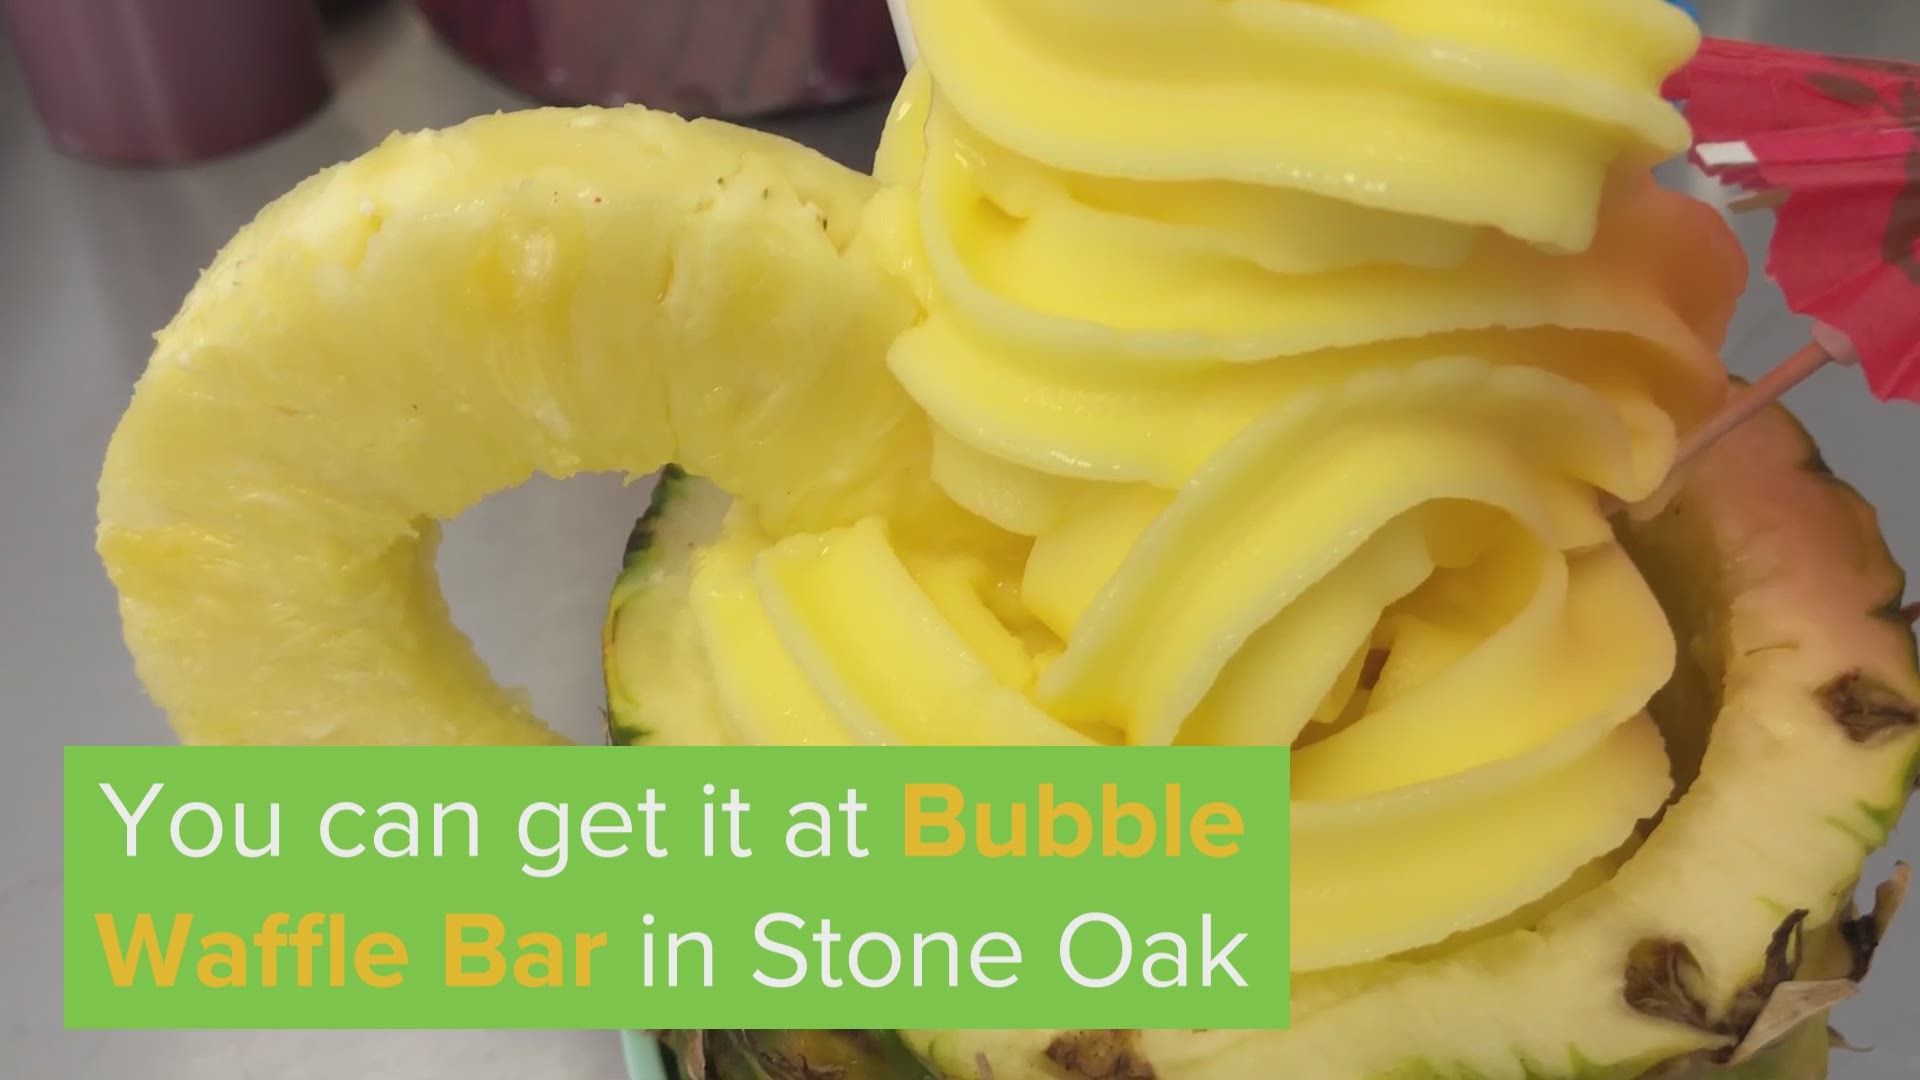 Bubble Waffle Bar is bringing the popular Disney treat to San Antonio. It already sold out once this summer.